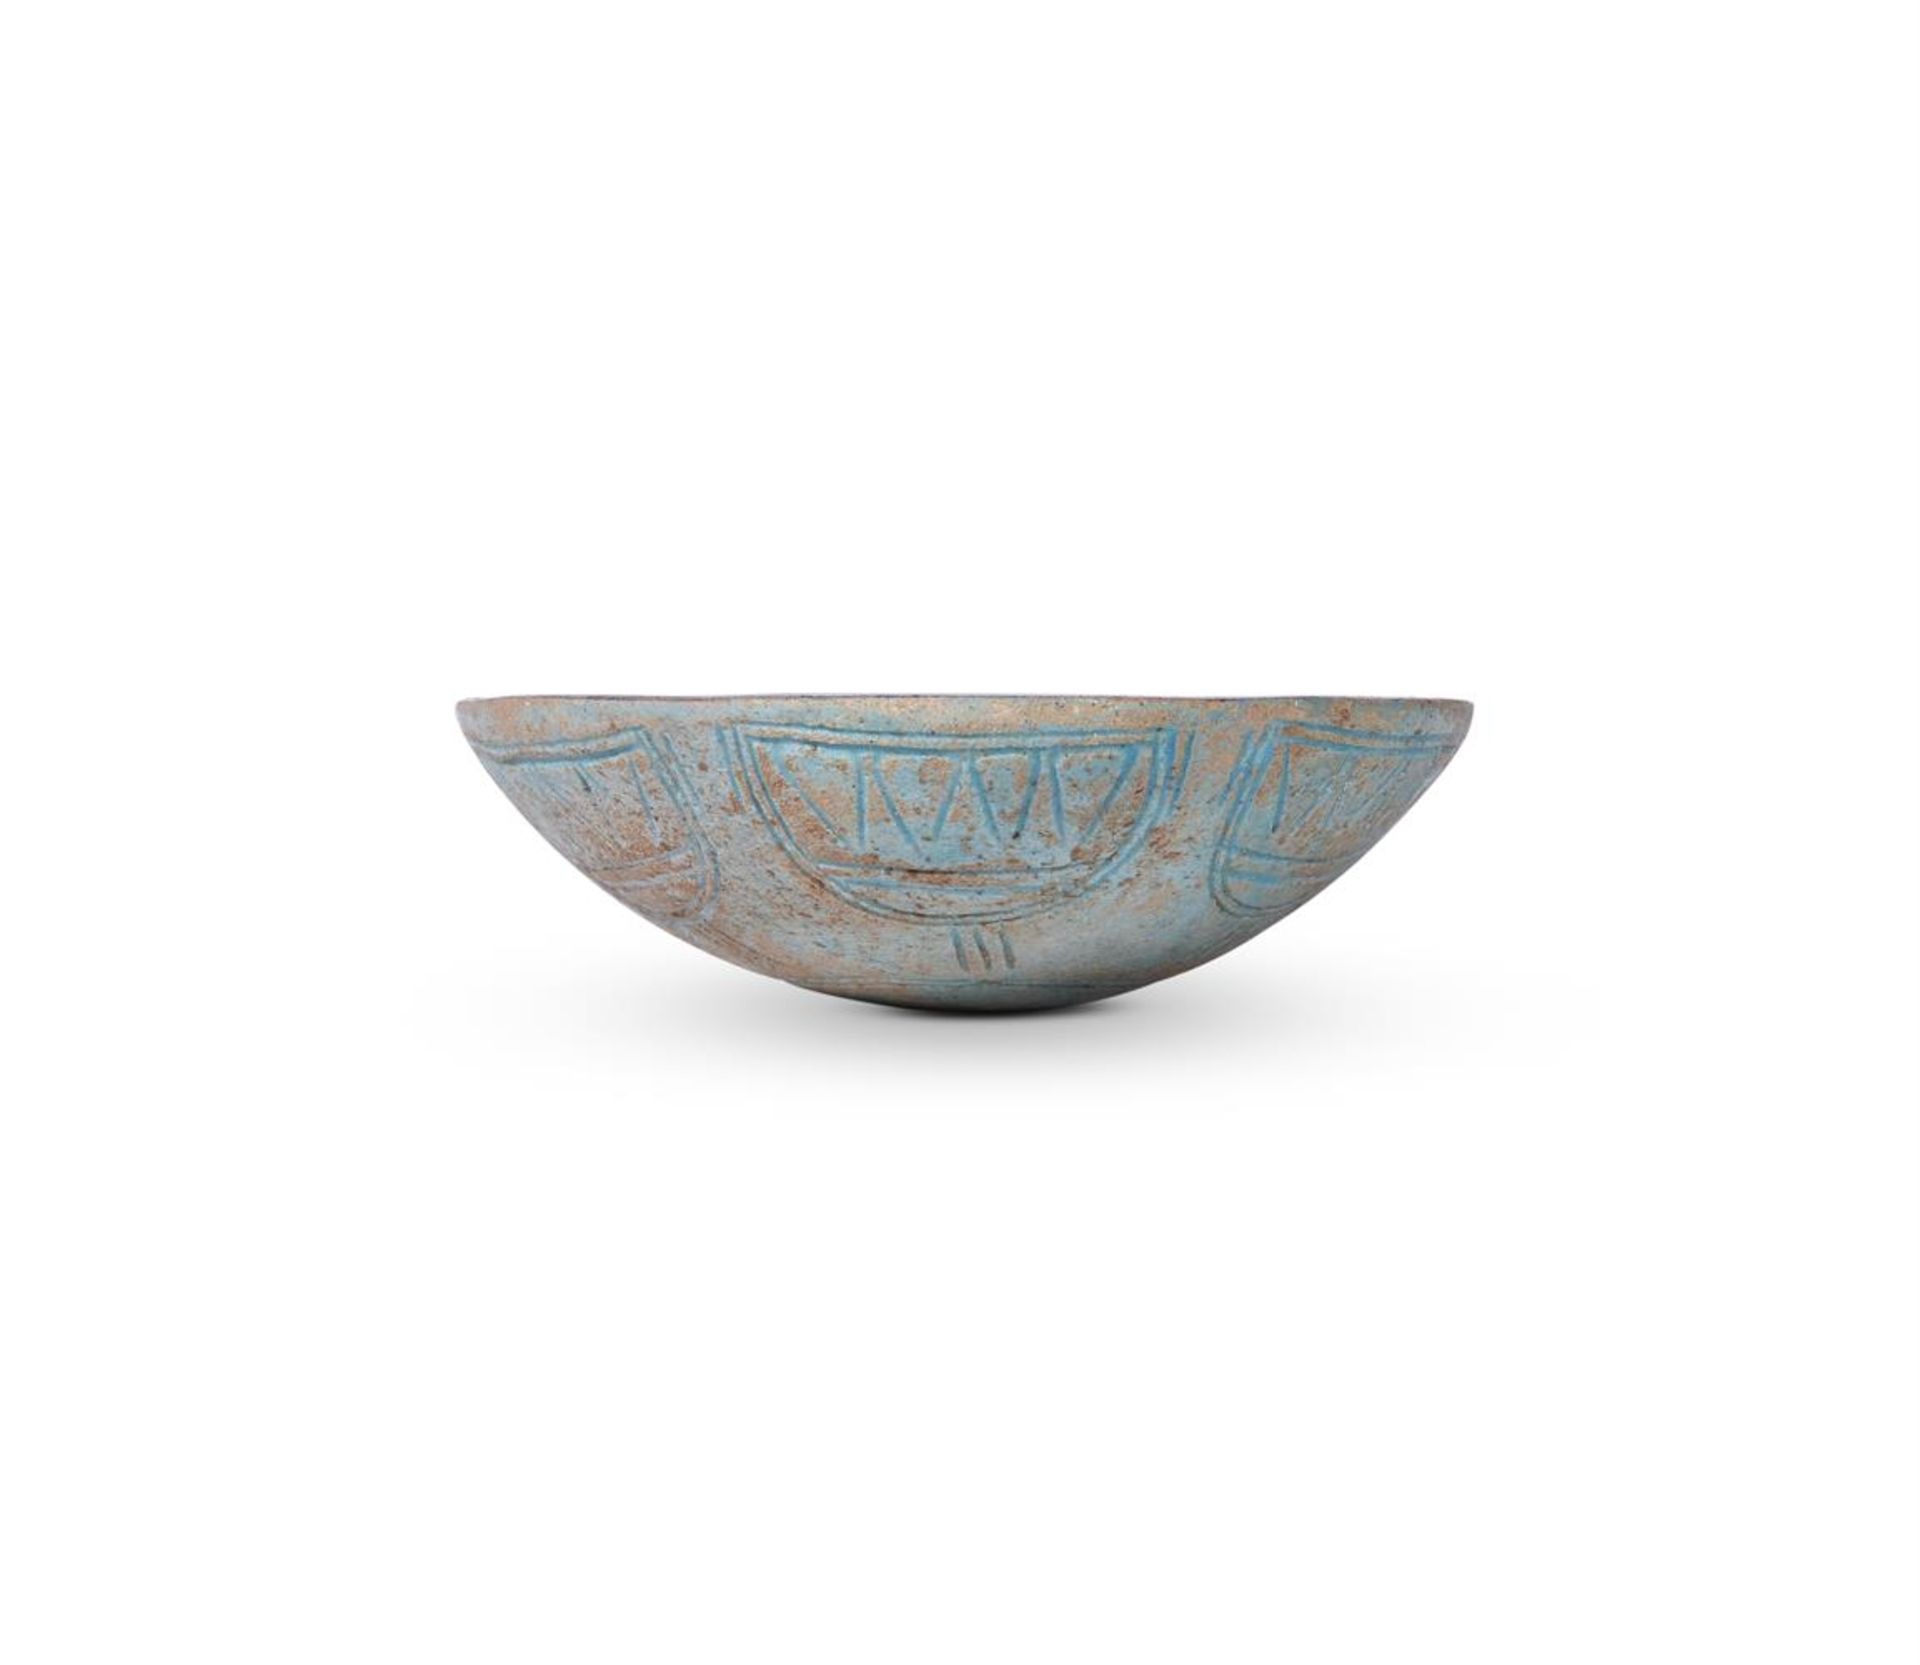 AN ANCIENT EGYPTIAN BLUE FAIENCE BOWL, POSSIBLY 18TH DYNASTY - Image 2 of 4